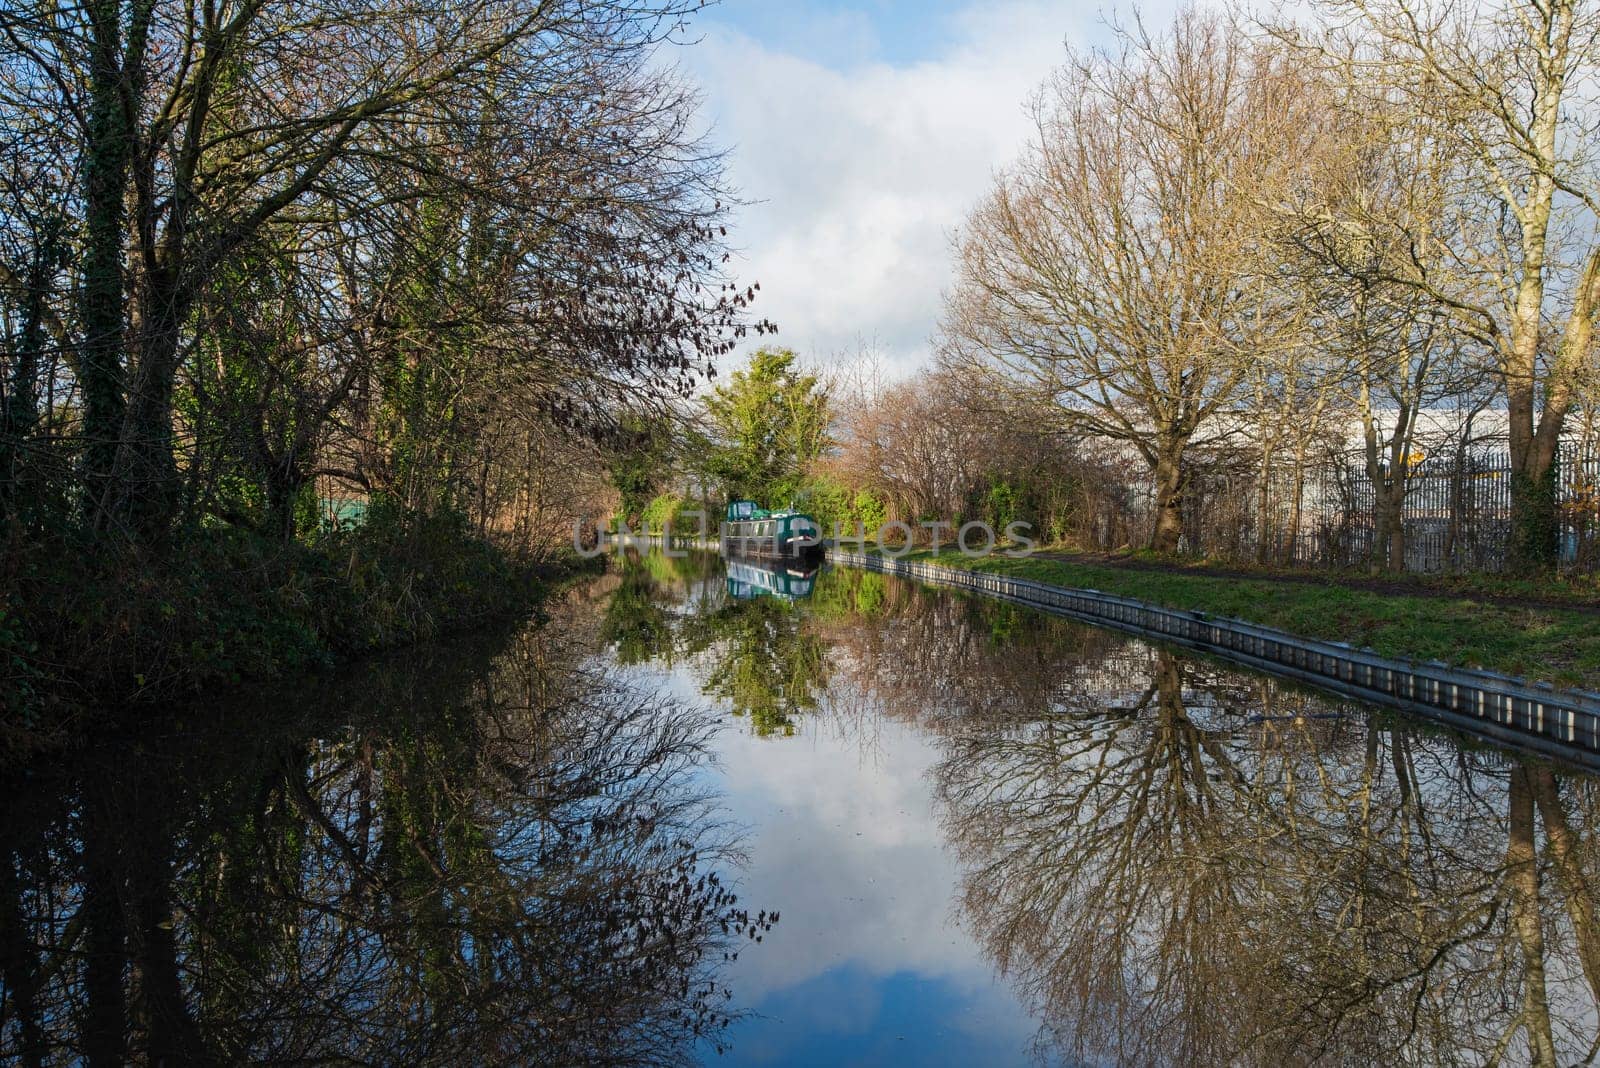 View from a narrowboat travelling in English rural countryside scenery on British waterway canal with moored boat